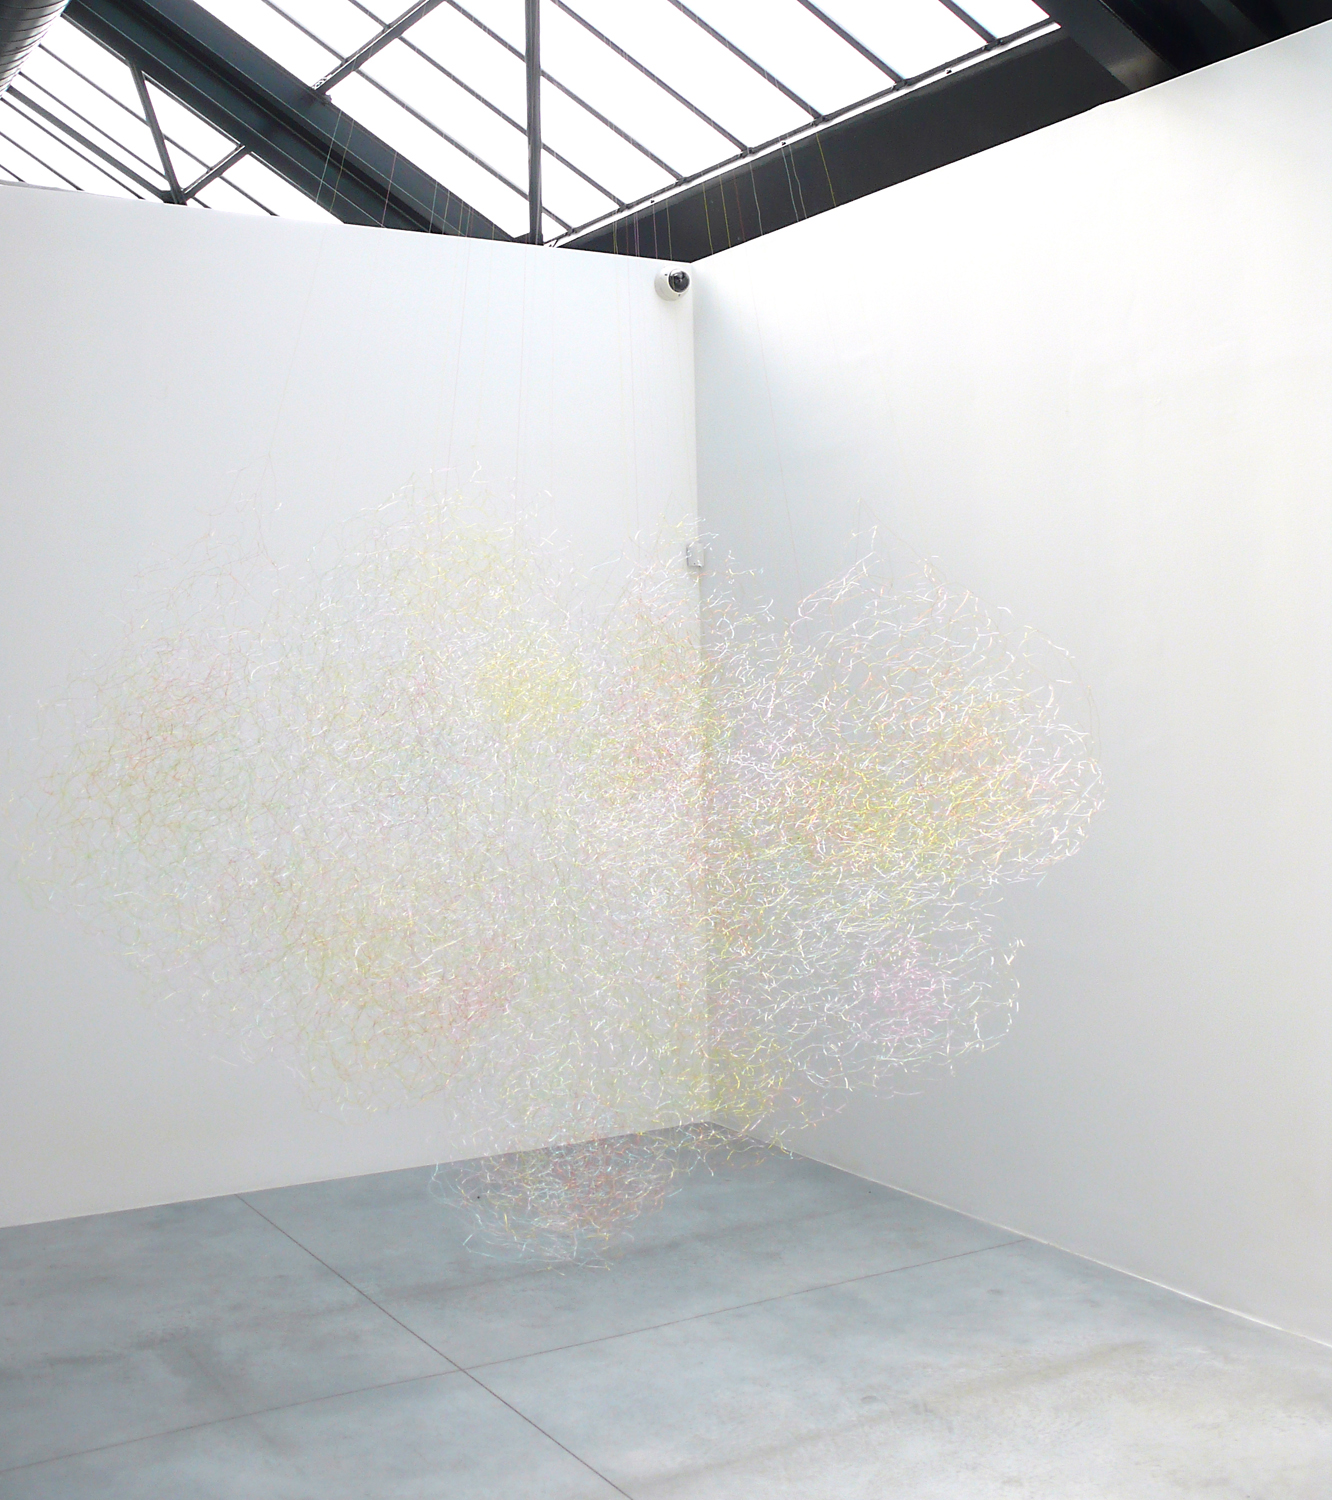   O B A F G K M , 2012, wire, dimensions variable 